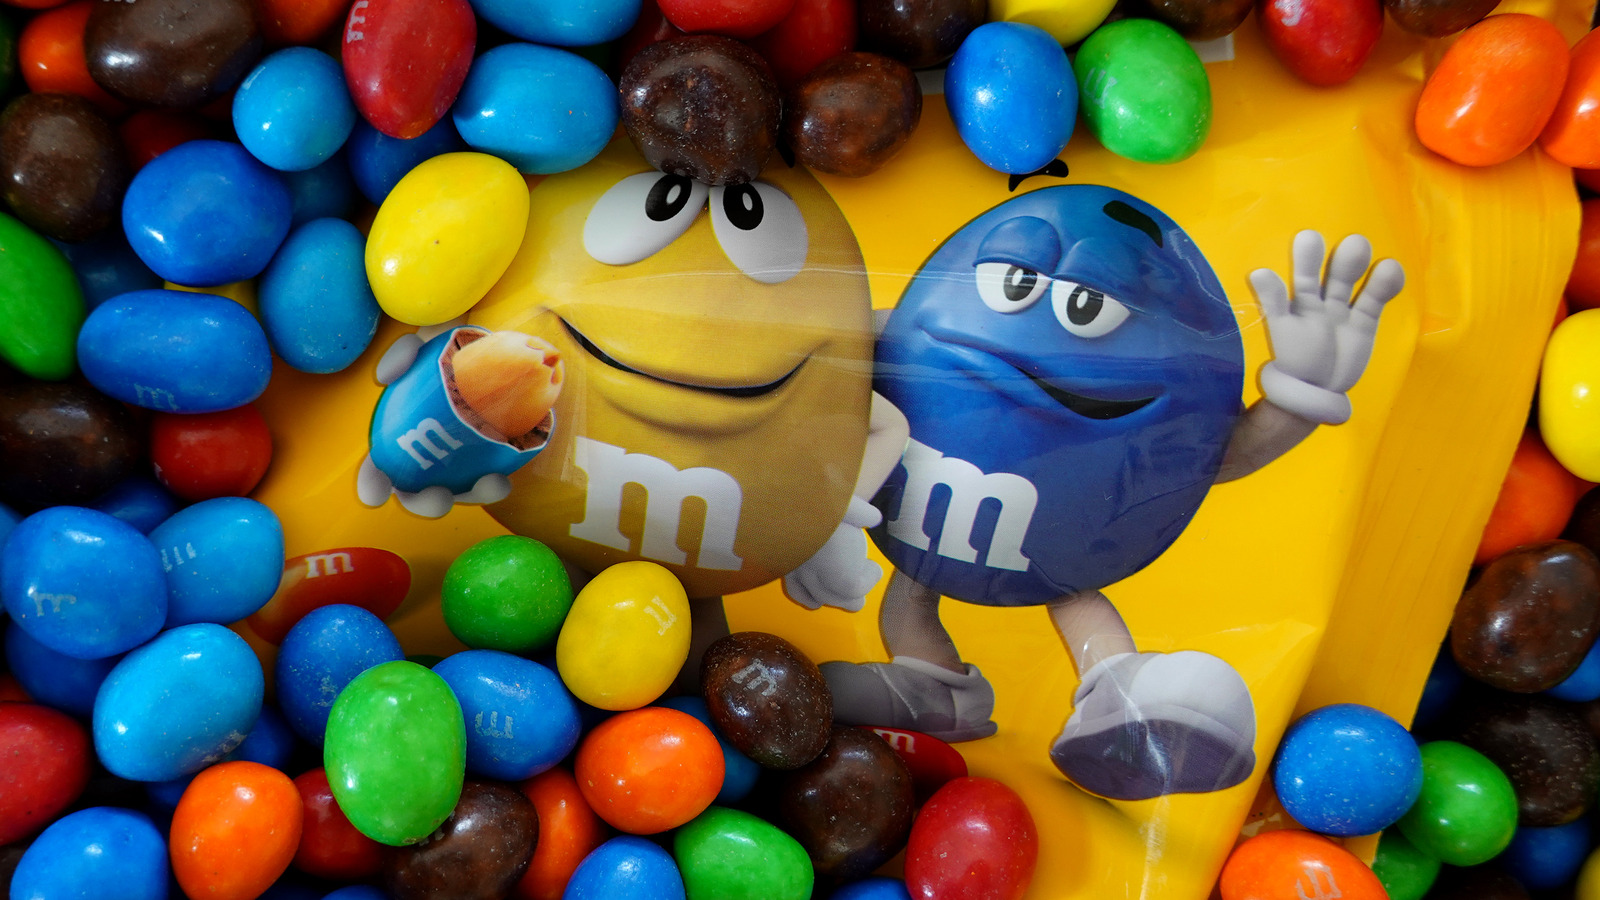 M&M'S USA - M&M'S USA updated their cover photo.